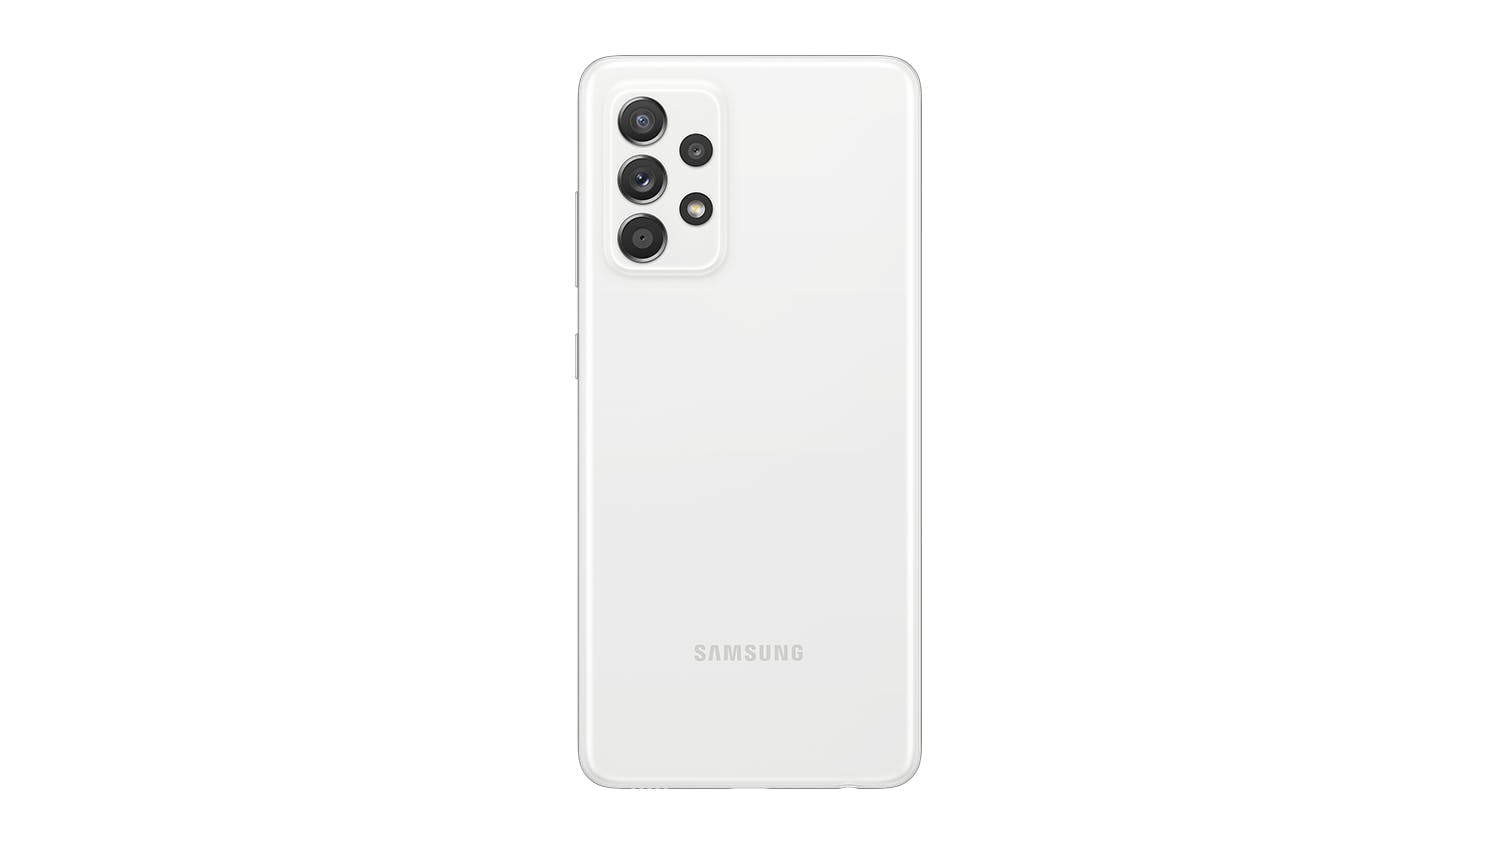 Samsung Galaxy A52s 5G 128GB Smartphone - Awesome White (Spark/Open Network)